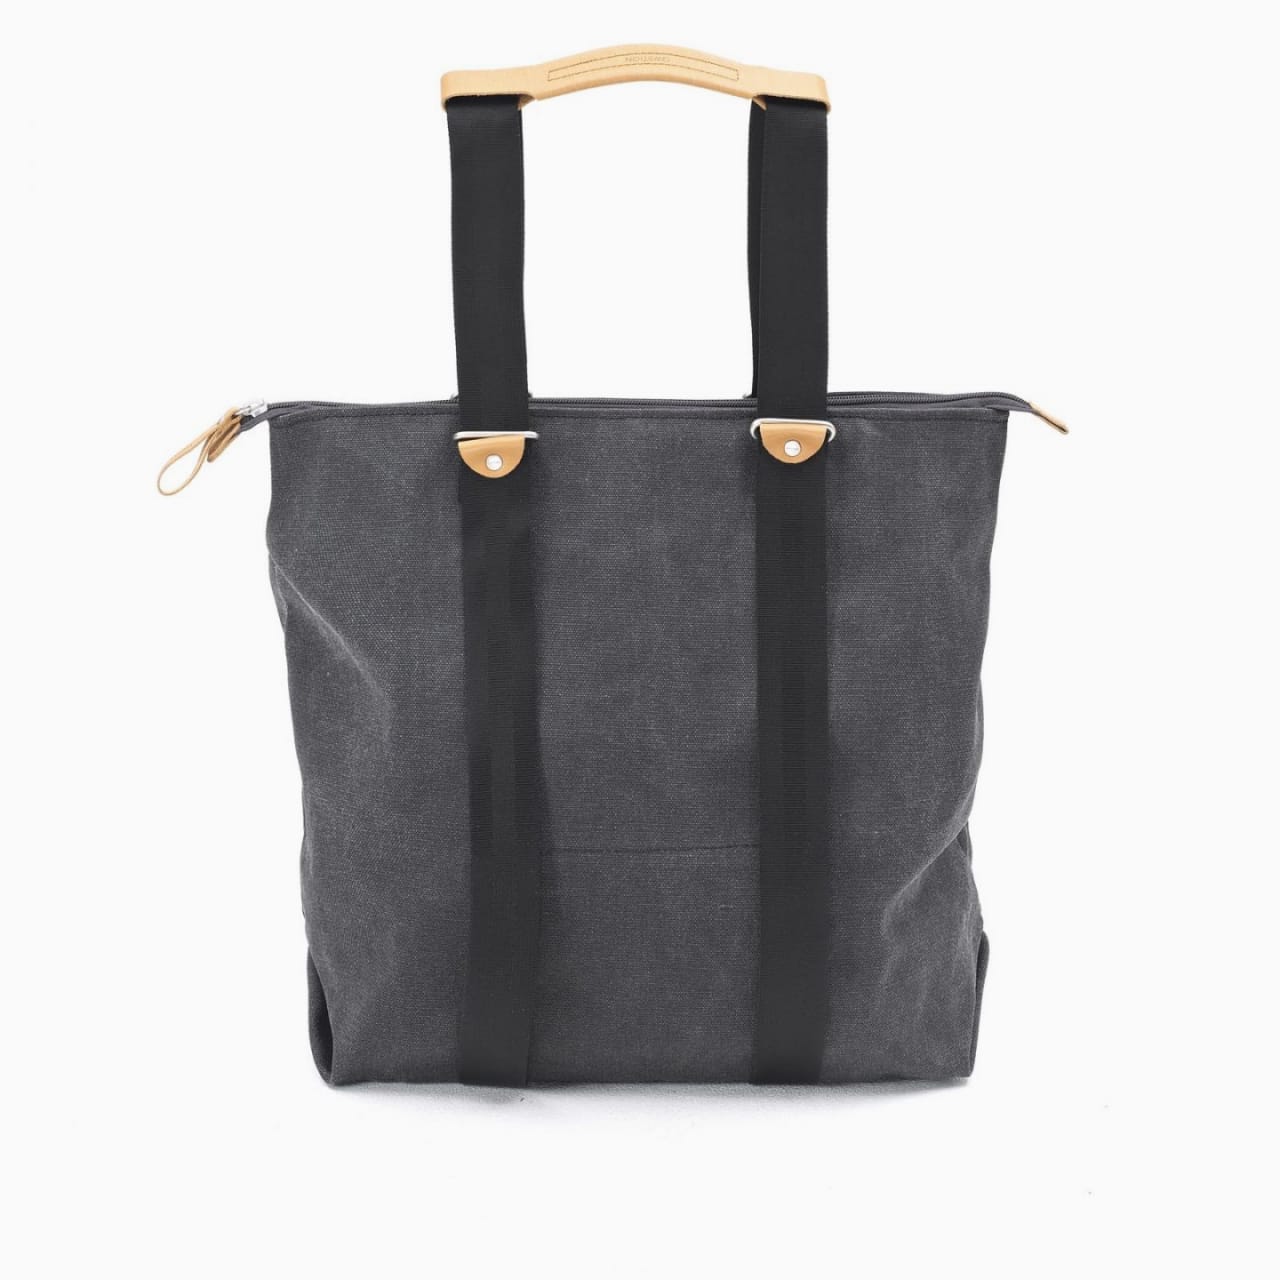 Front of tote bag with washed black canvas body, black straps, and tan leather handles and accents.